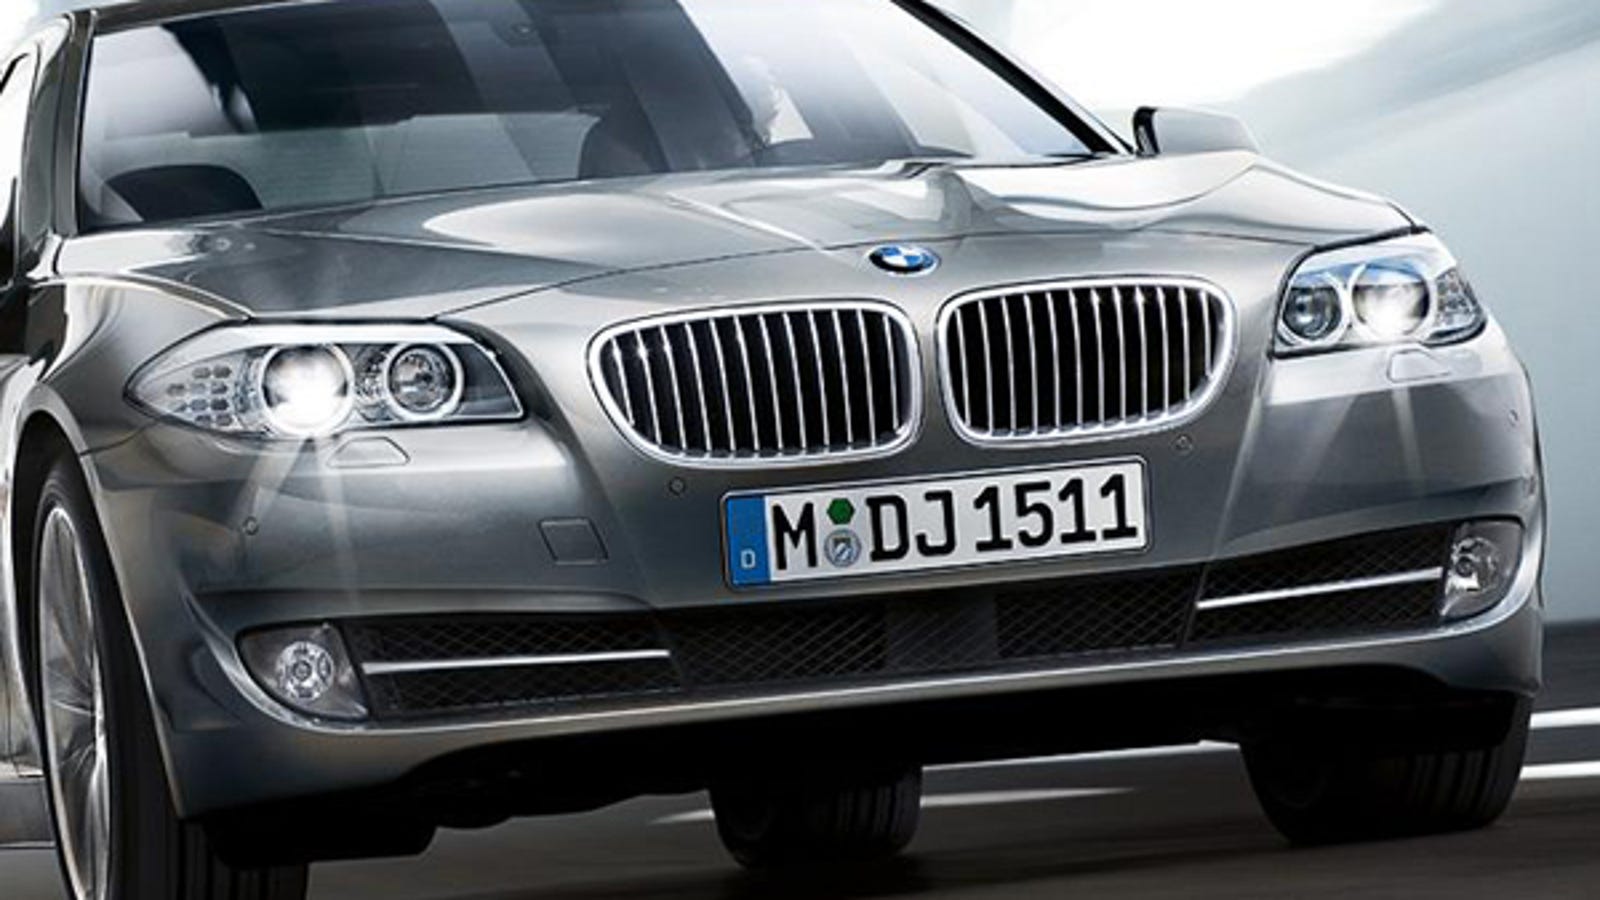 2011 BMW 3 Series: What To Expect